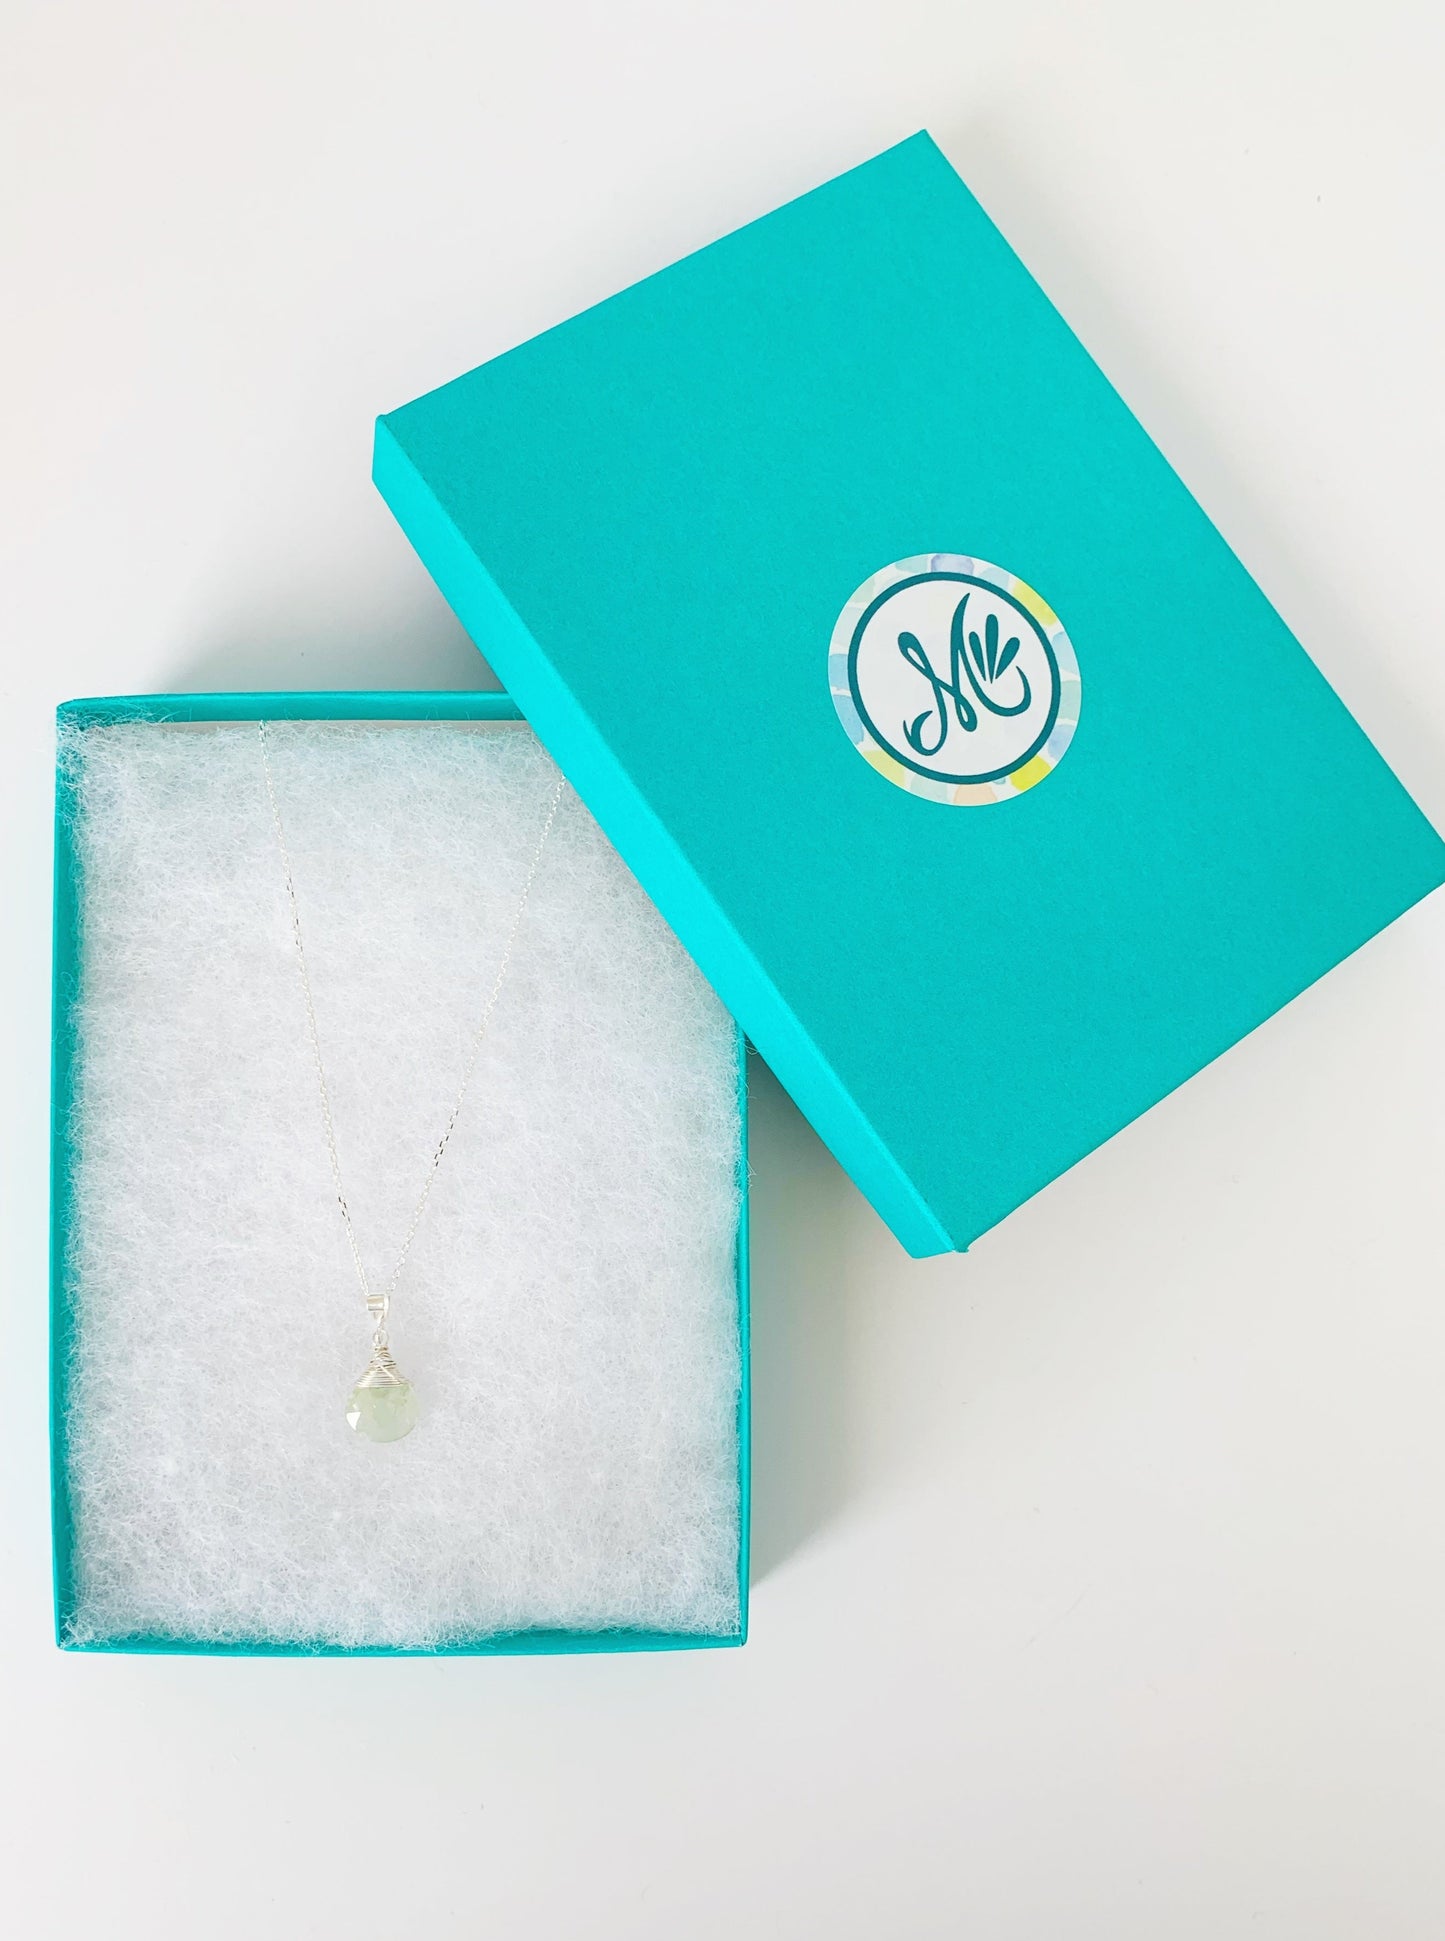 Raindrop aquamarine and sterling silver wire wrapped pendant necklace pictured in a teal gift box on a white surface